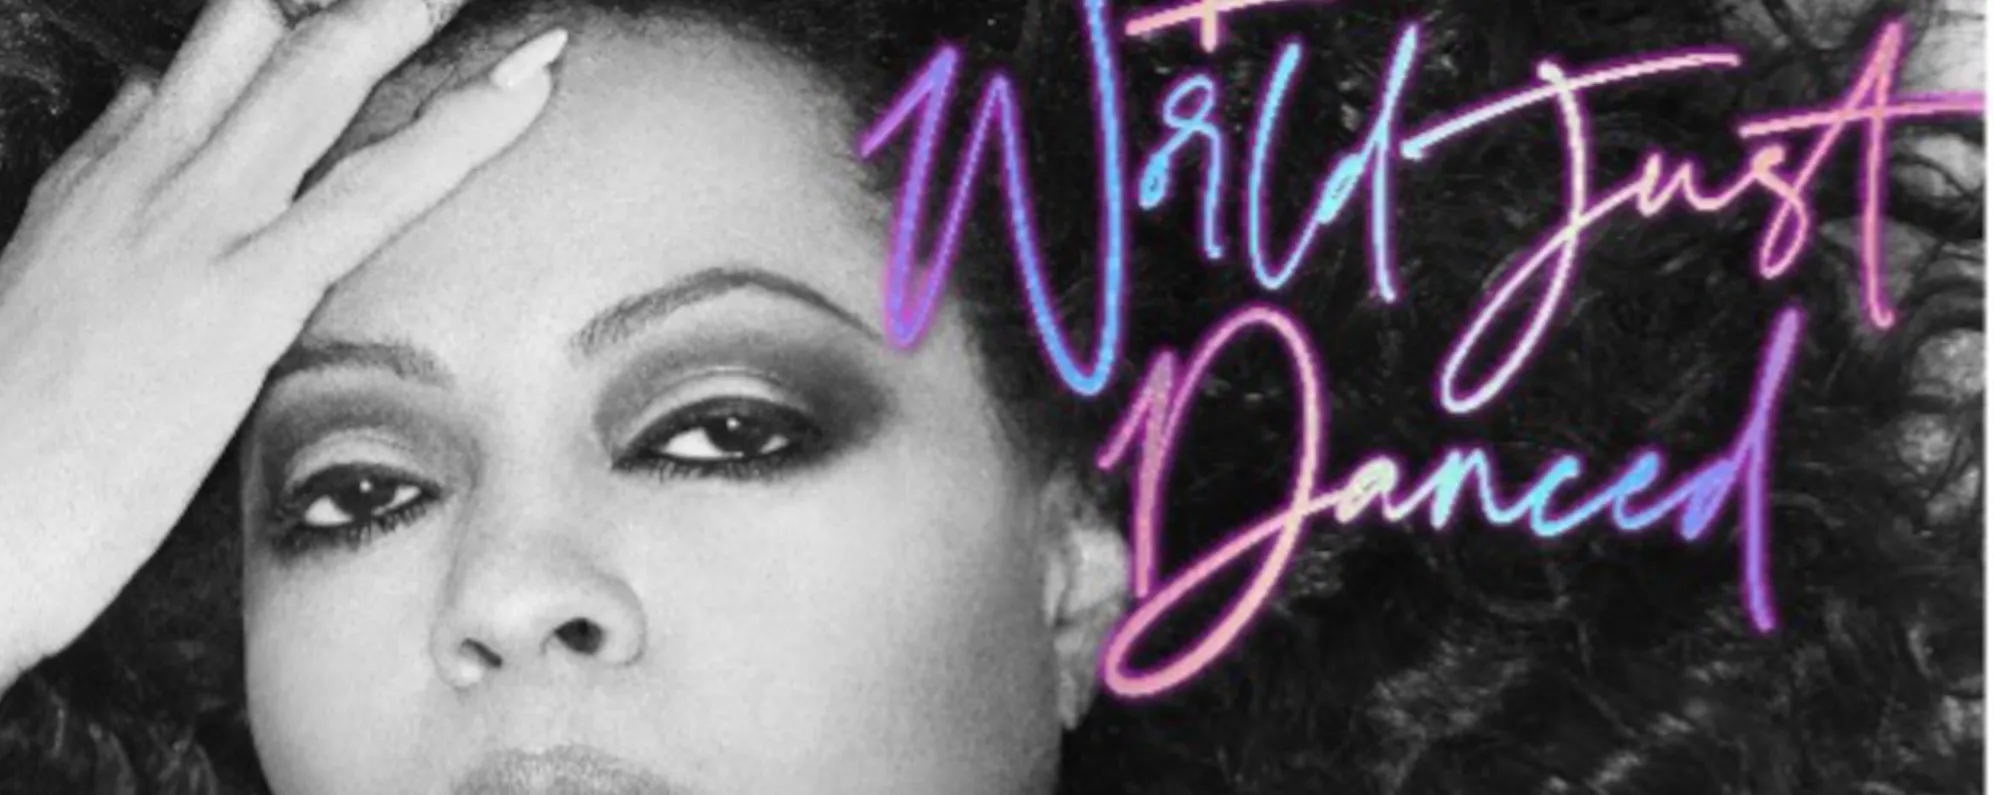 Diana Ross Releases New Single, “If The World Just Danced,” Ahead of Nov. Album